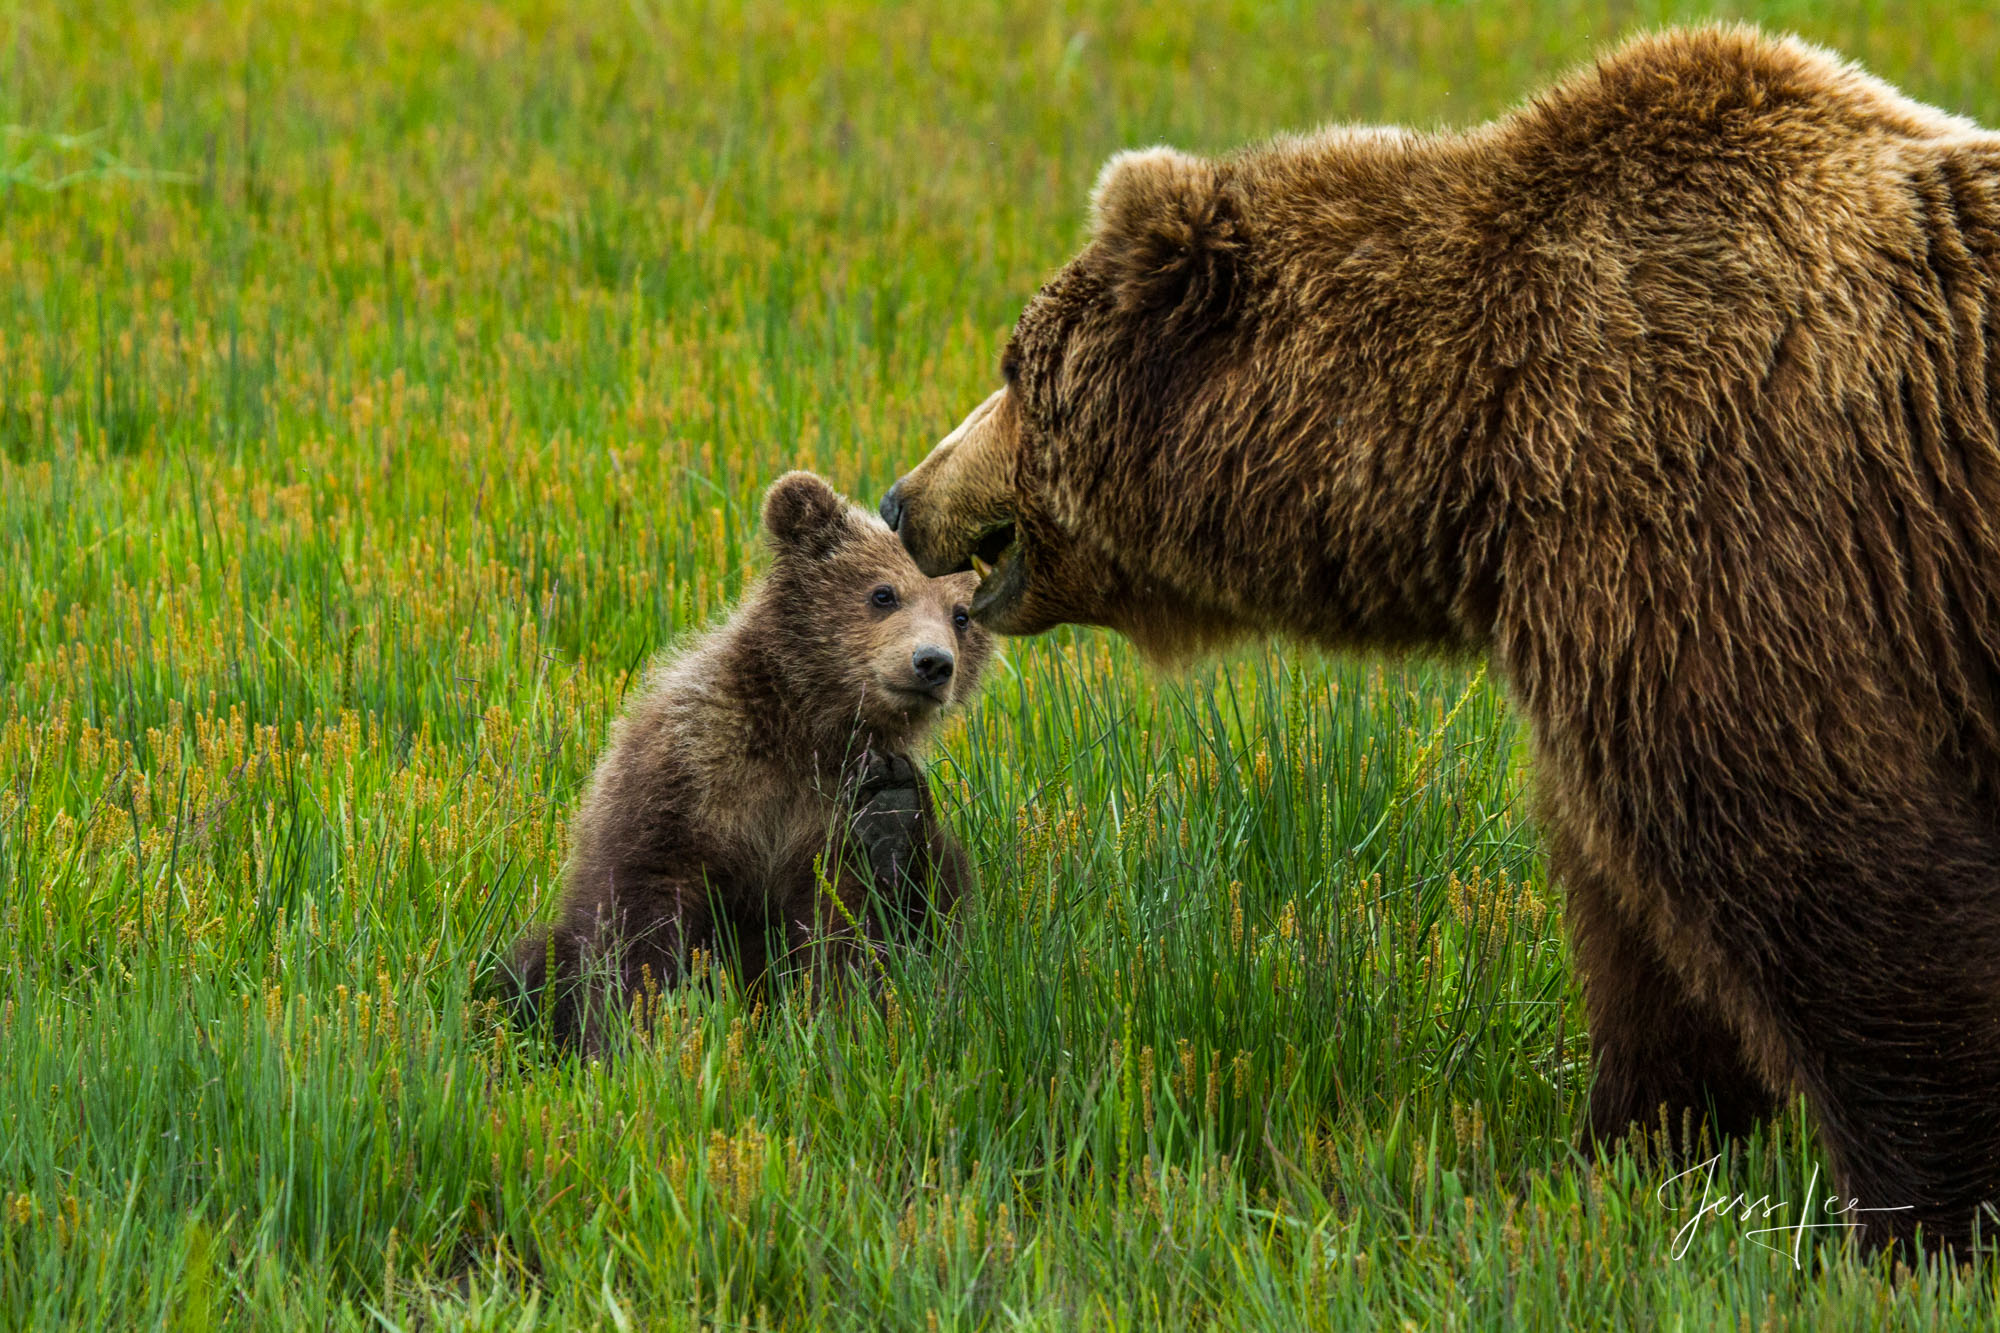 Alaska Grizzlies, Cub and Mom a Limited edition of 800 prints. These Grizzly bear fine art wildlife photographs are offered as...